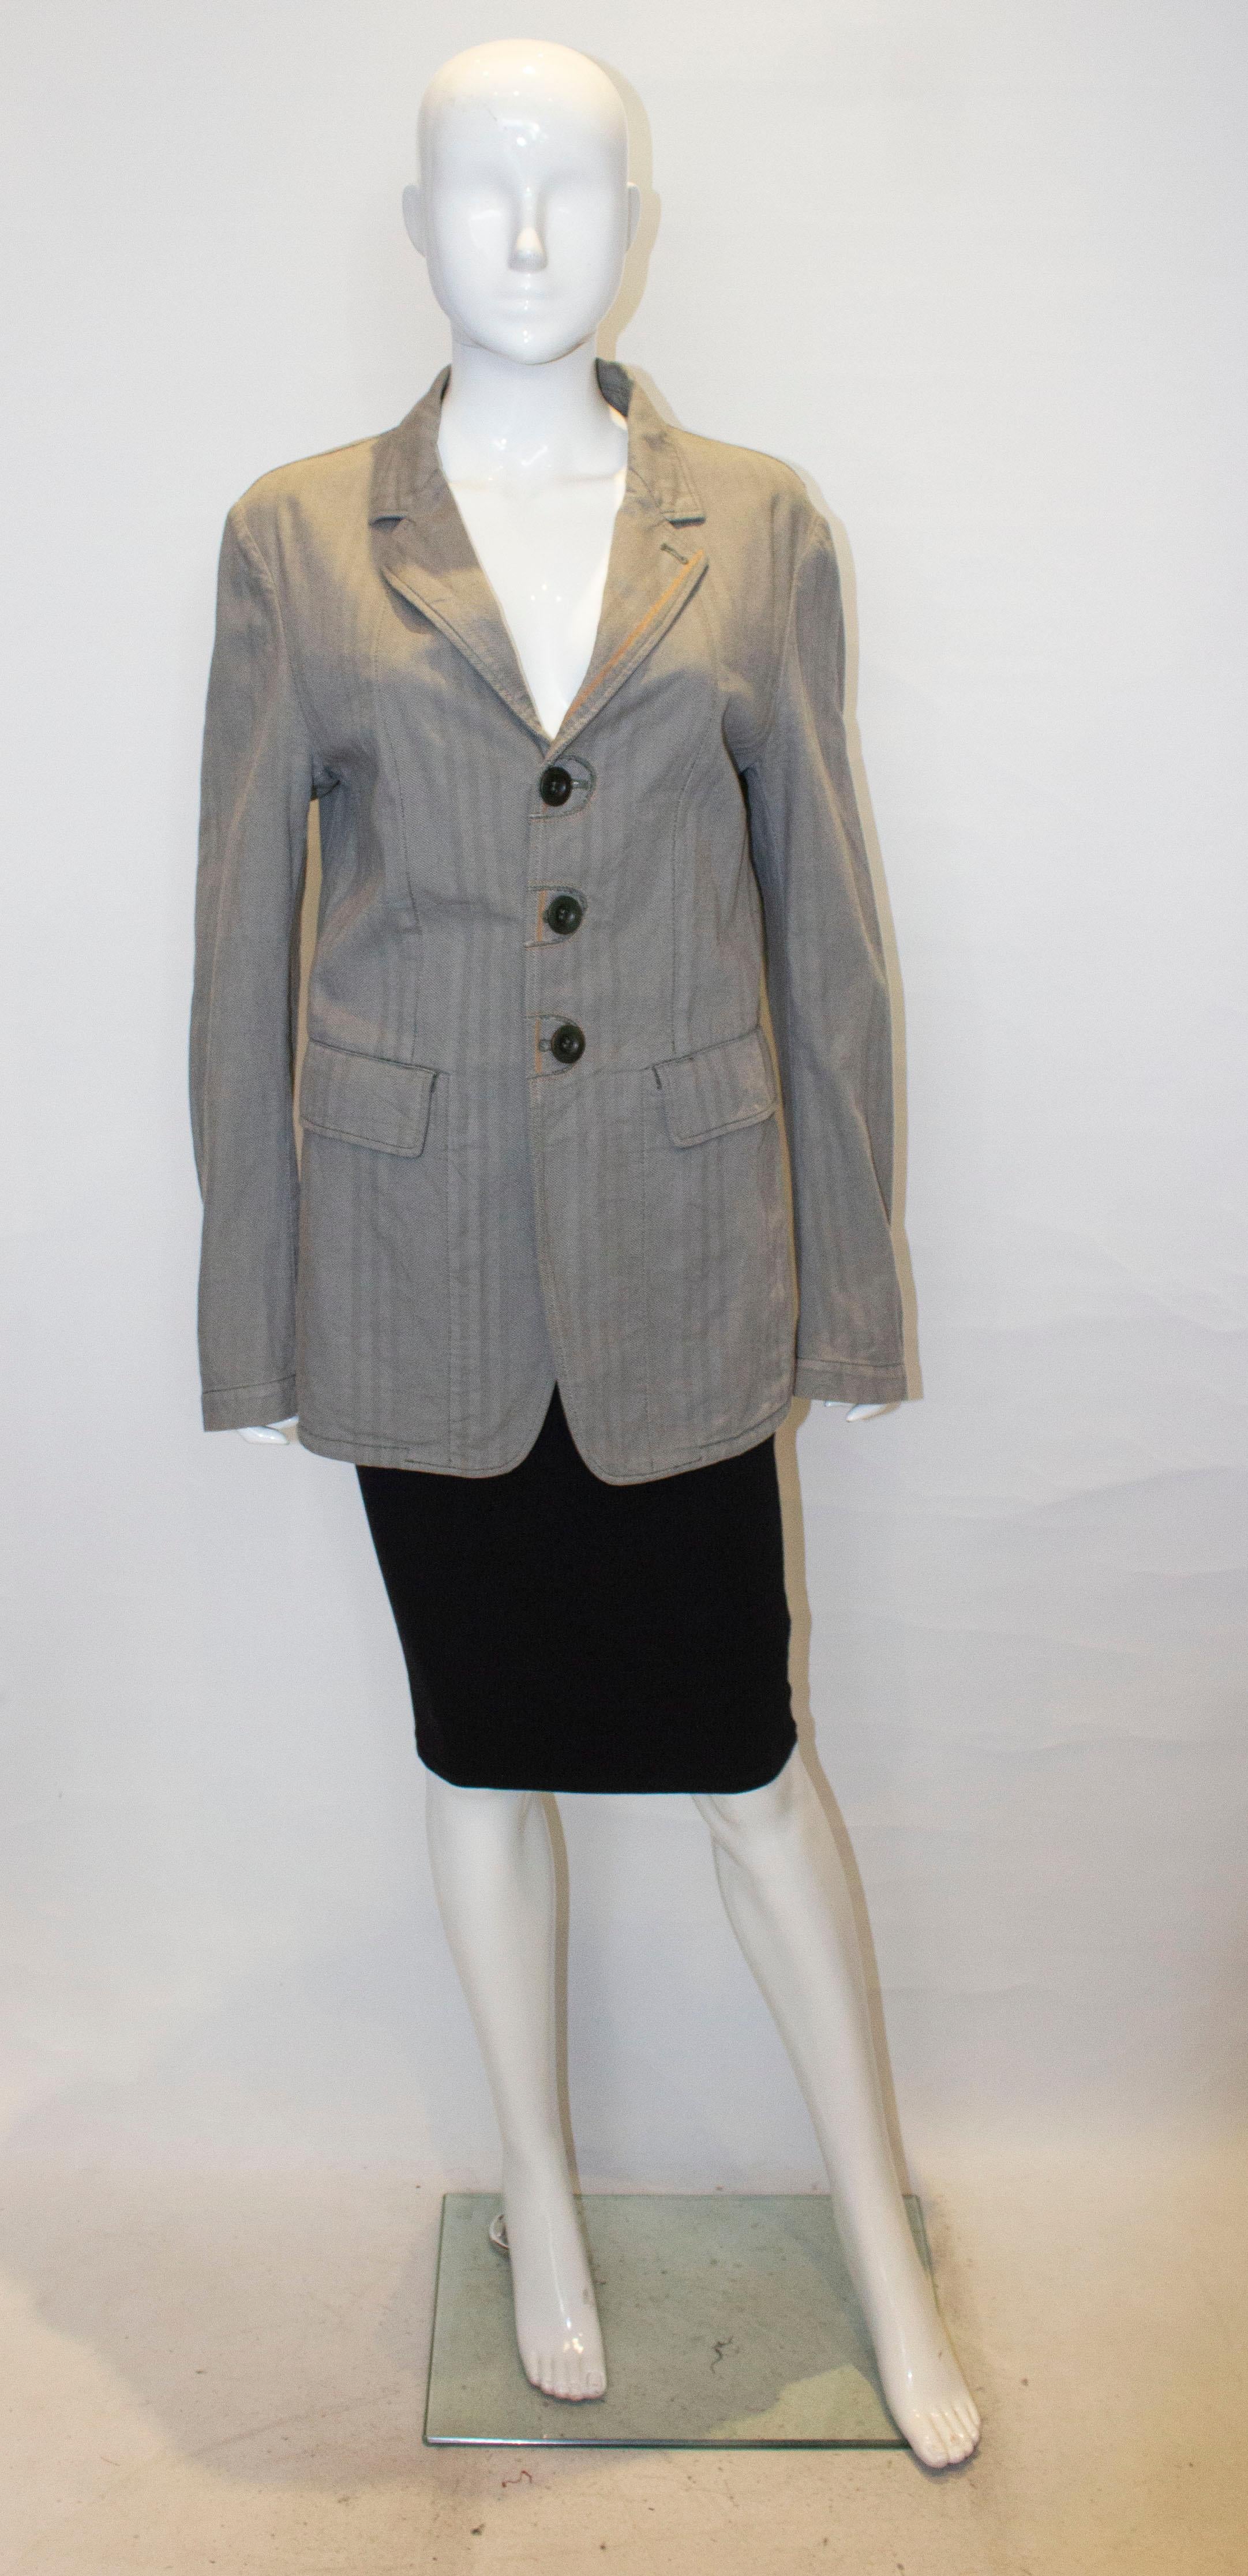 A chic cotton jacket by Marithe Francois Girbaud.  The jacket is in an interesting mix pattern fabric. It is unlined, with  three button front opening, two large pockets on the front, a one button cuff and 7 '' slit at the back. 